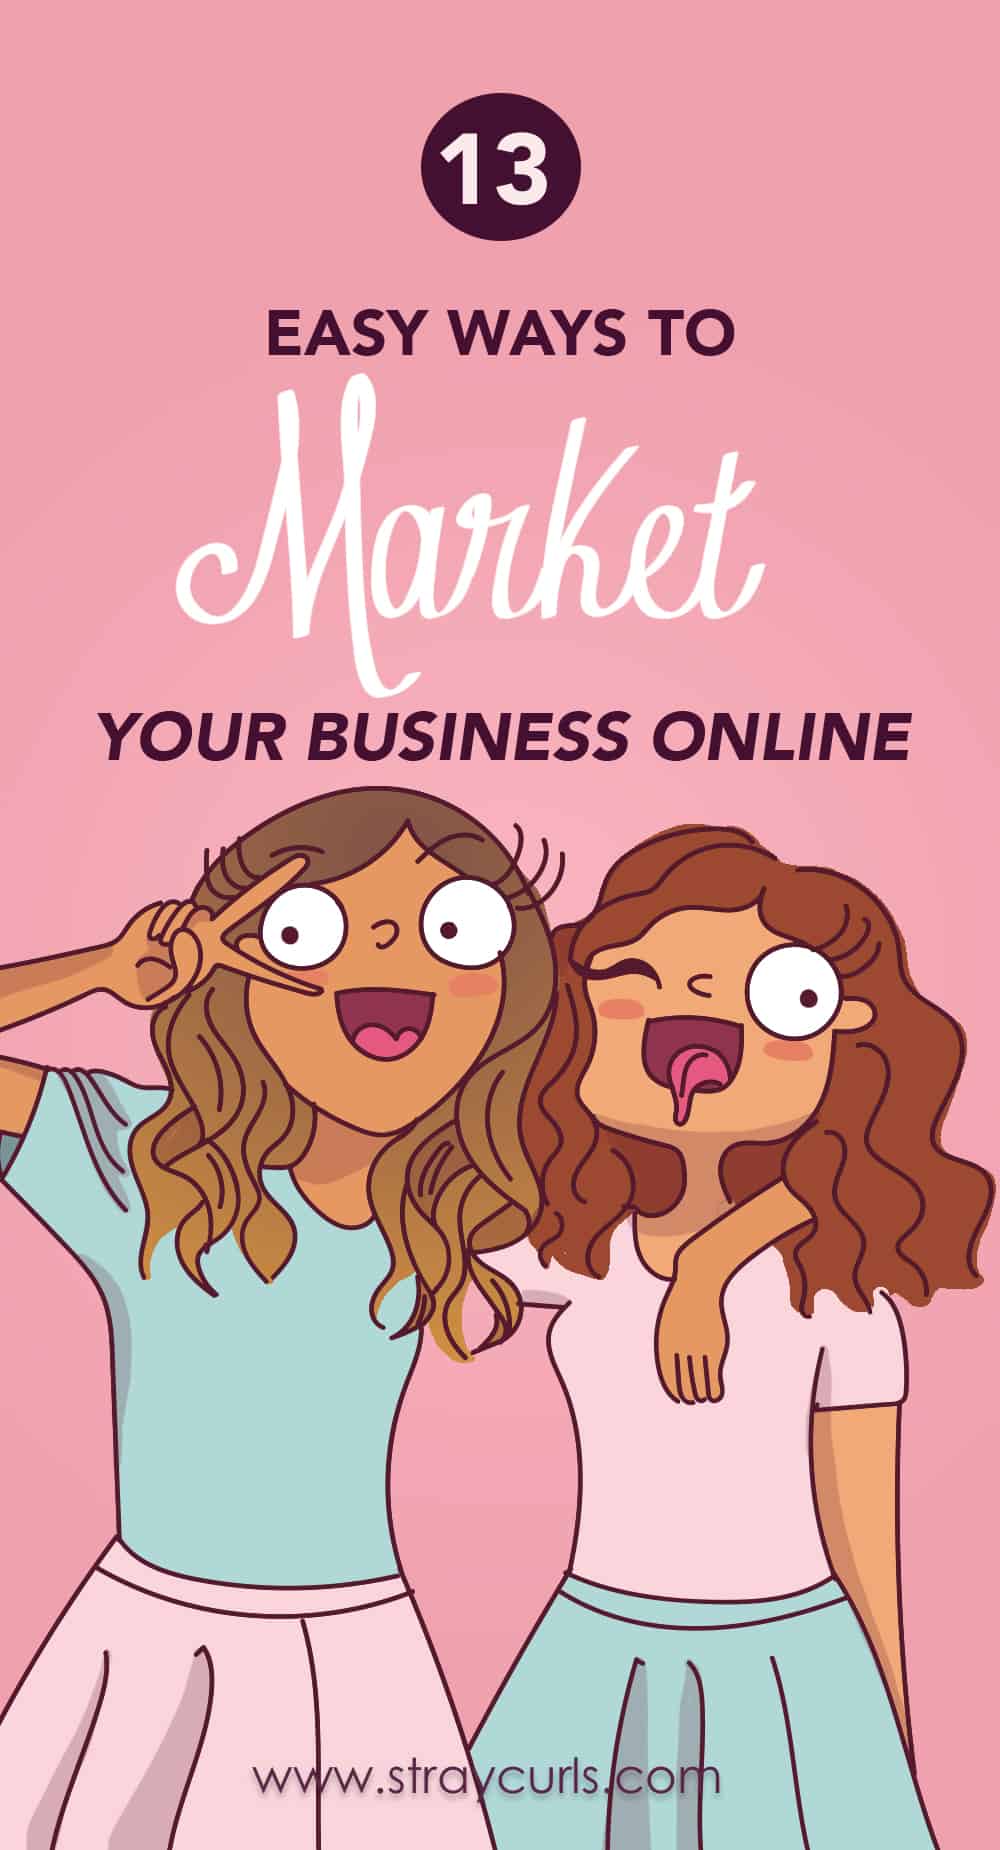 Learn how to market your blog or business online with these amazing tips! Every Blogger and Business Owner should read this! It involves building your brand and reiterating your blog mission statement in everything you do! This is the best way to market your business online. #blog #bloggingtips #business #marketing